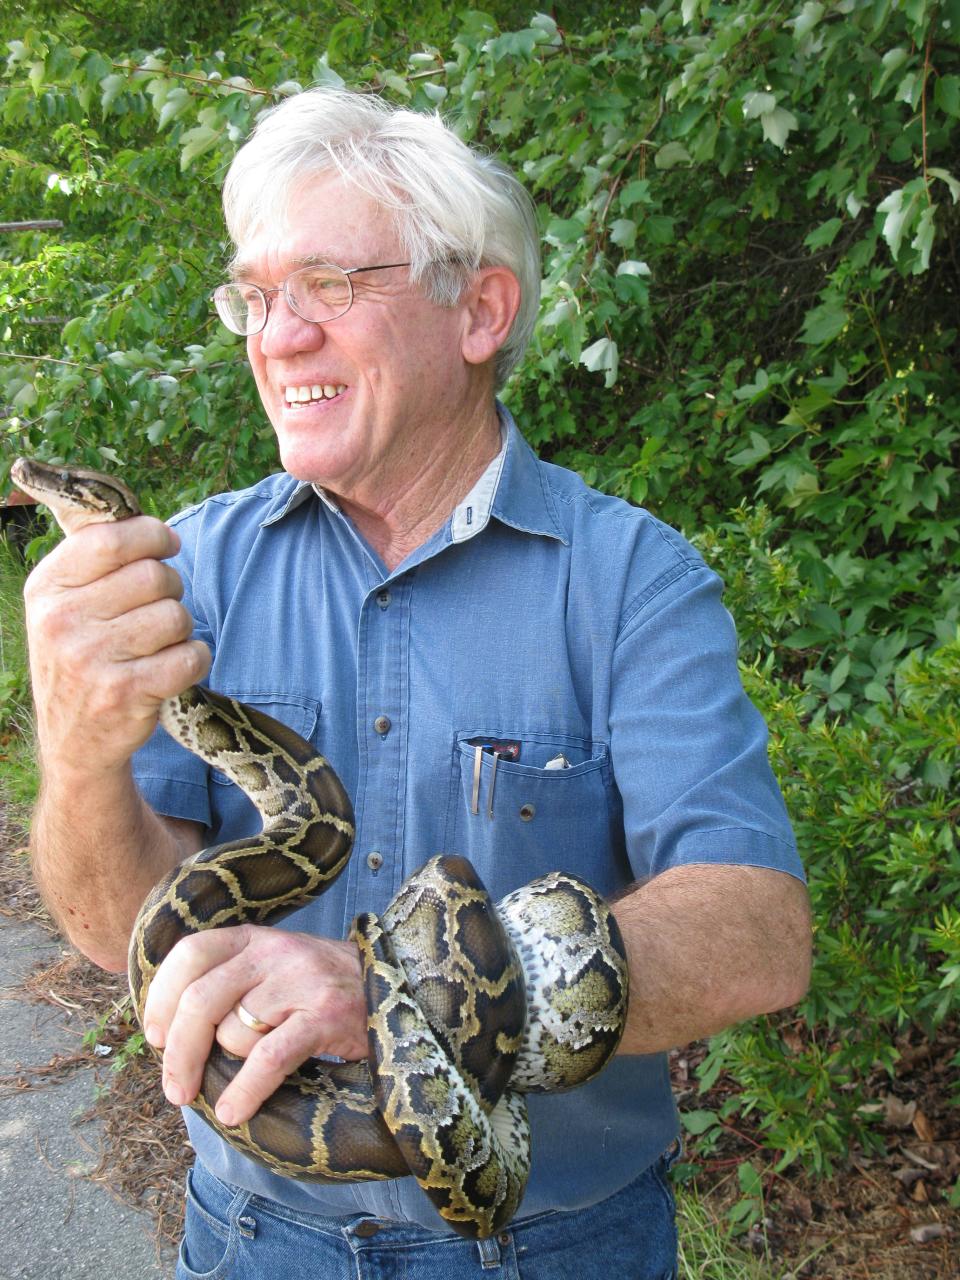 Whit Gibbons, a professional herpetologist, is especially fond of snakes. (Photo provided by J.D. Wilson)